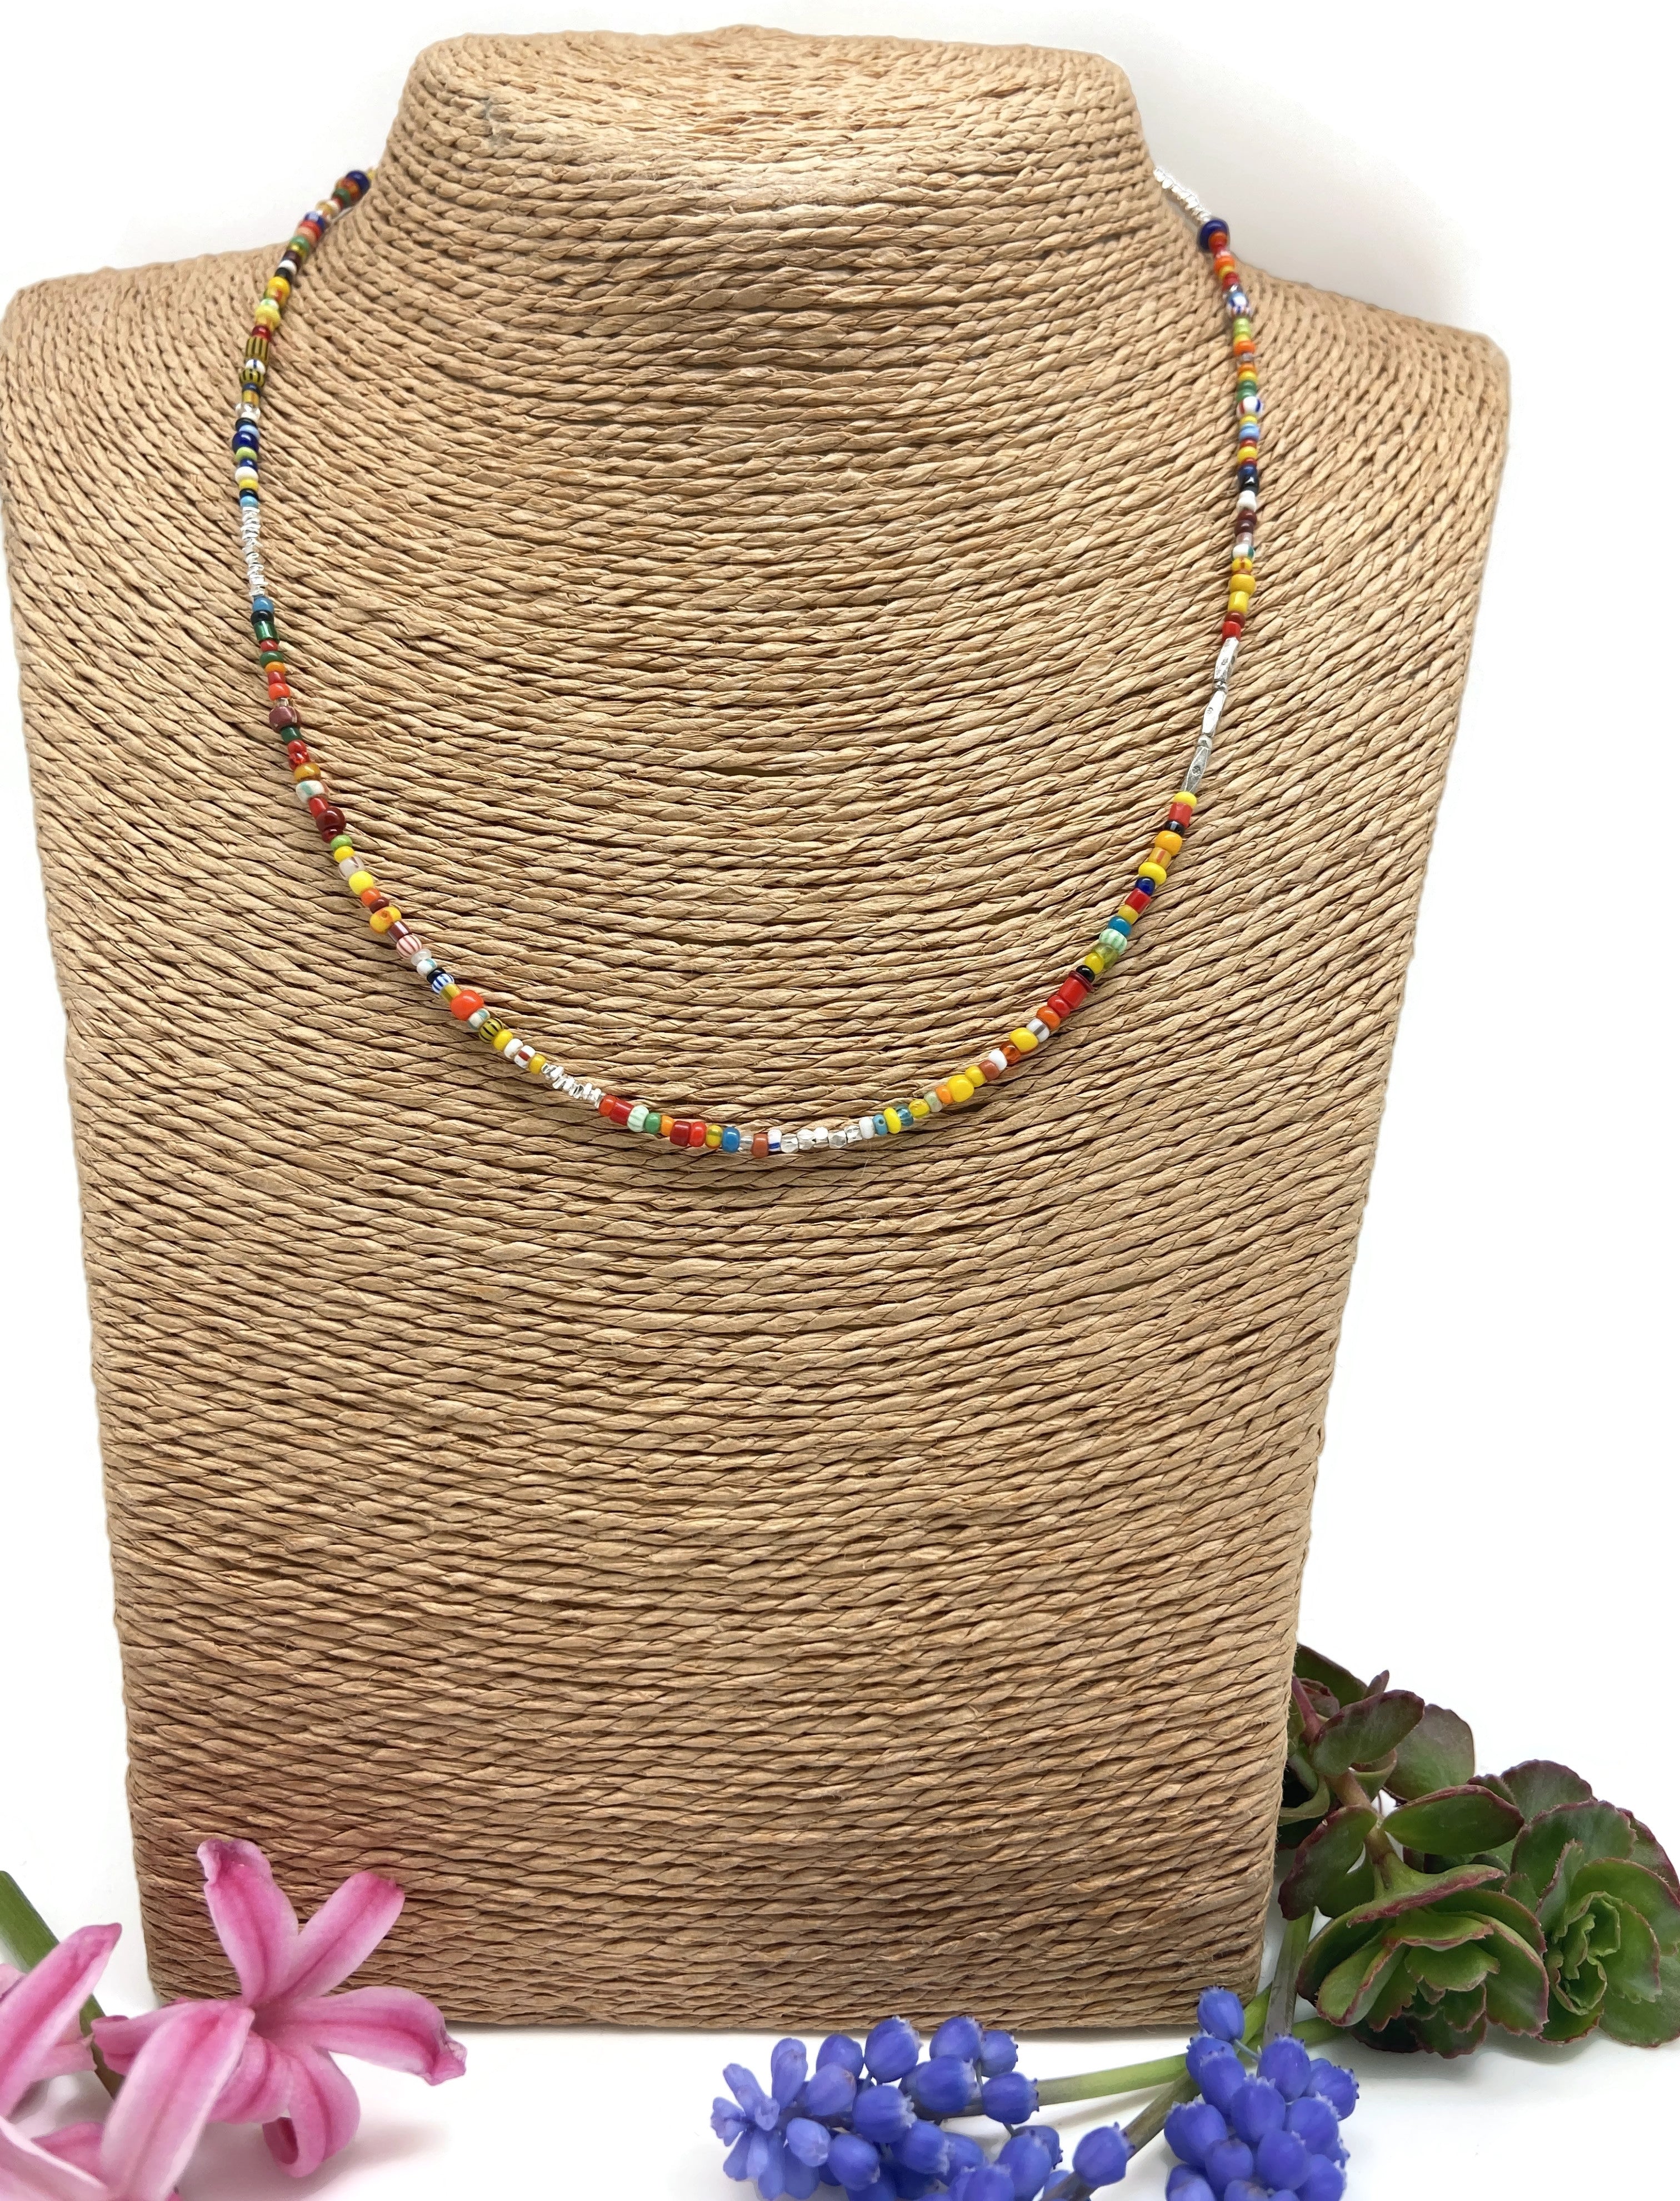 African Trade Bead Choker Necklace